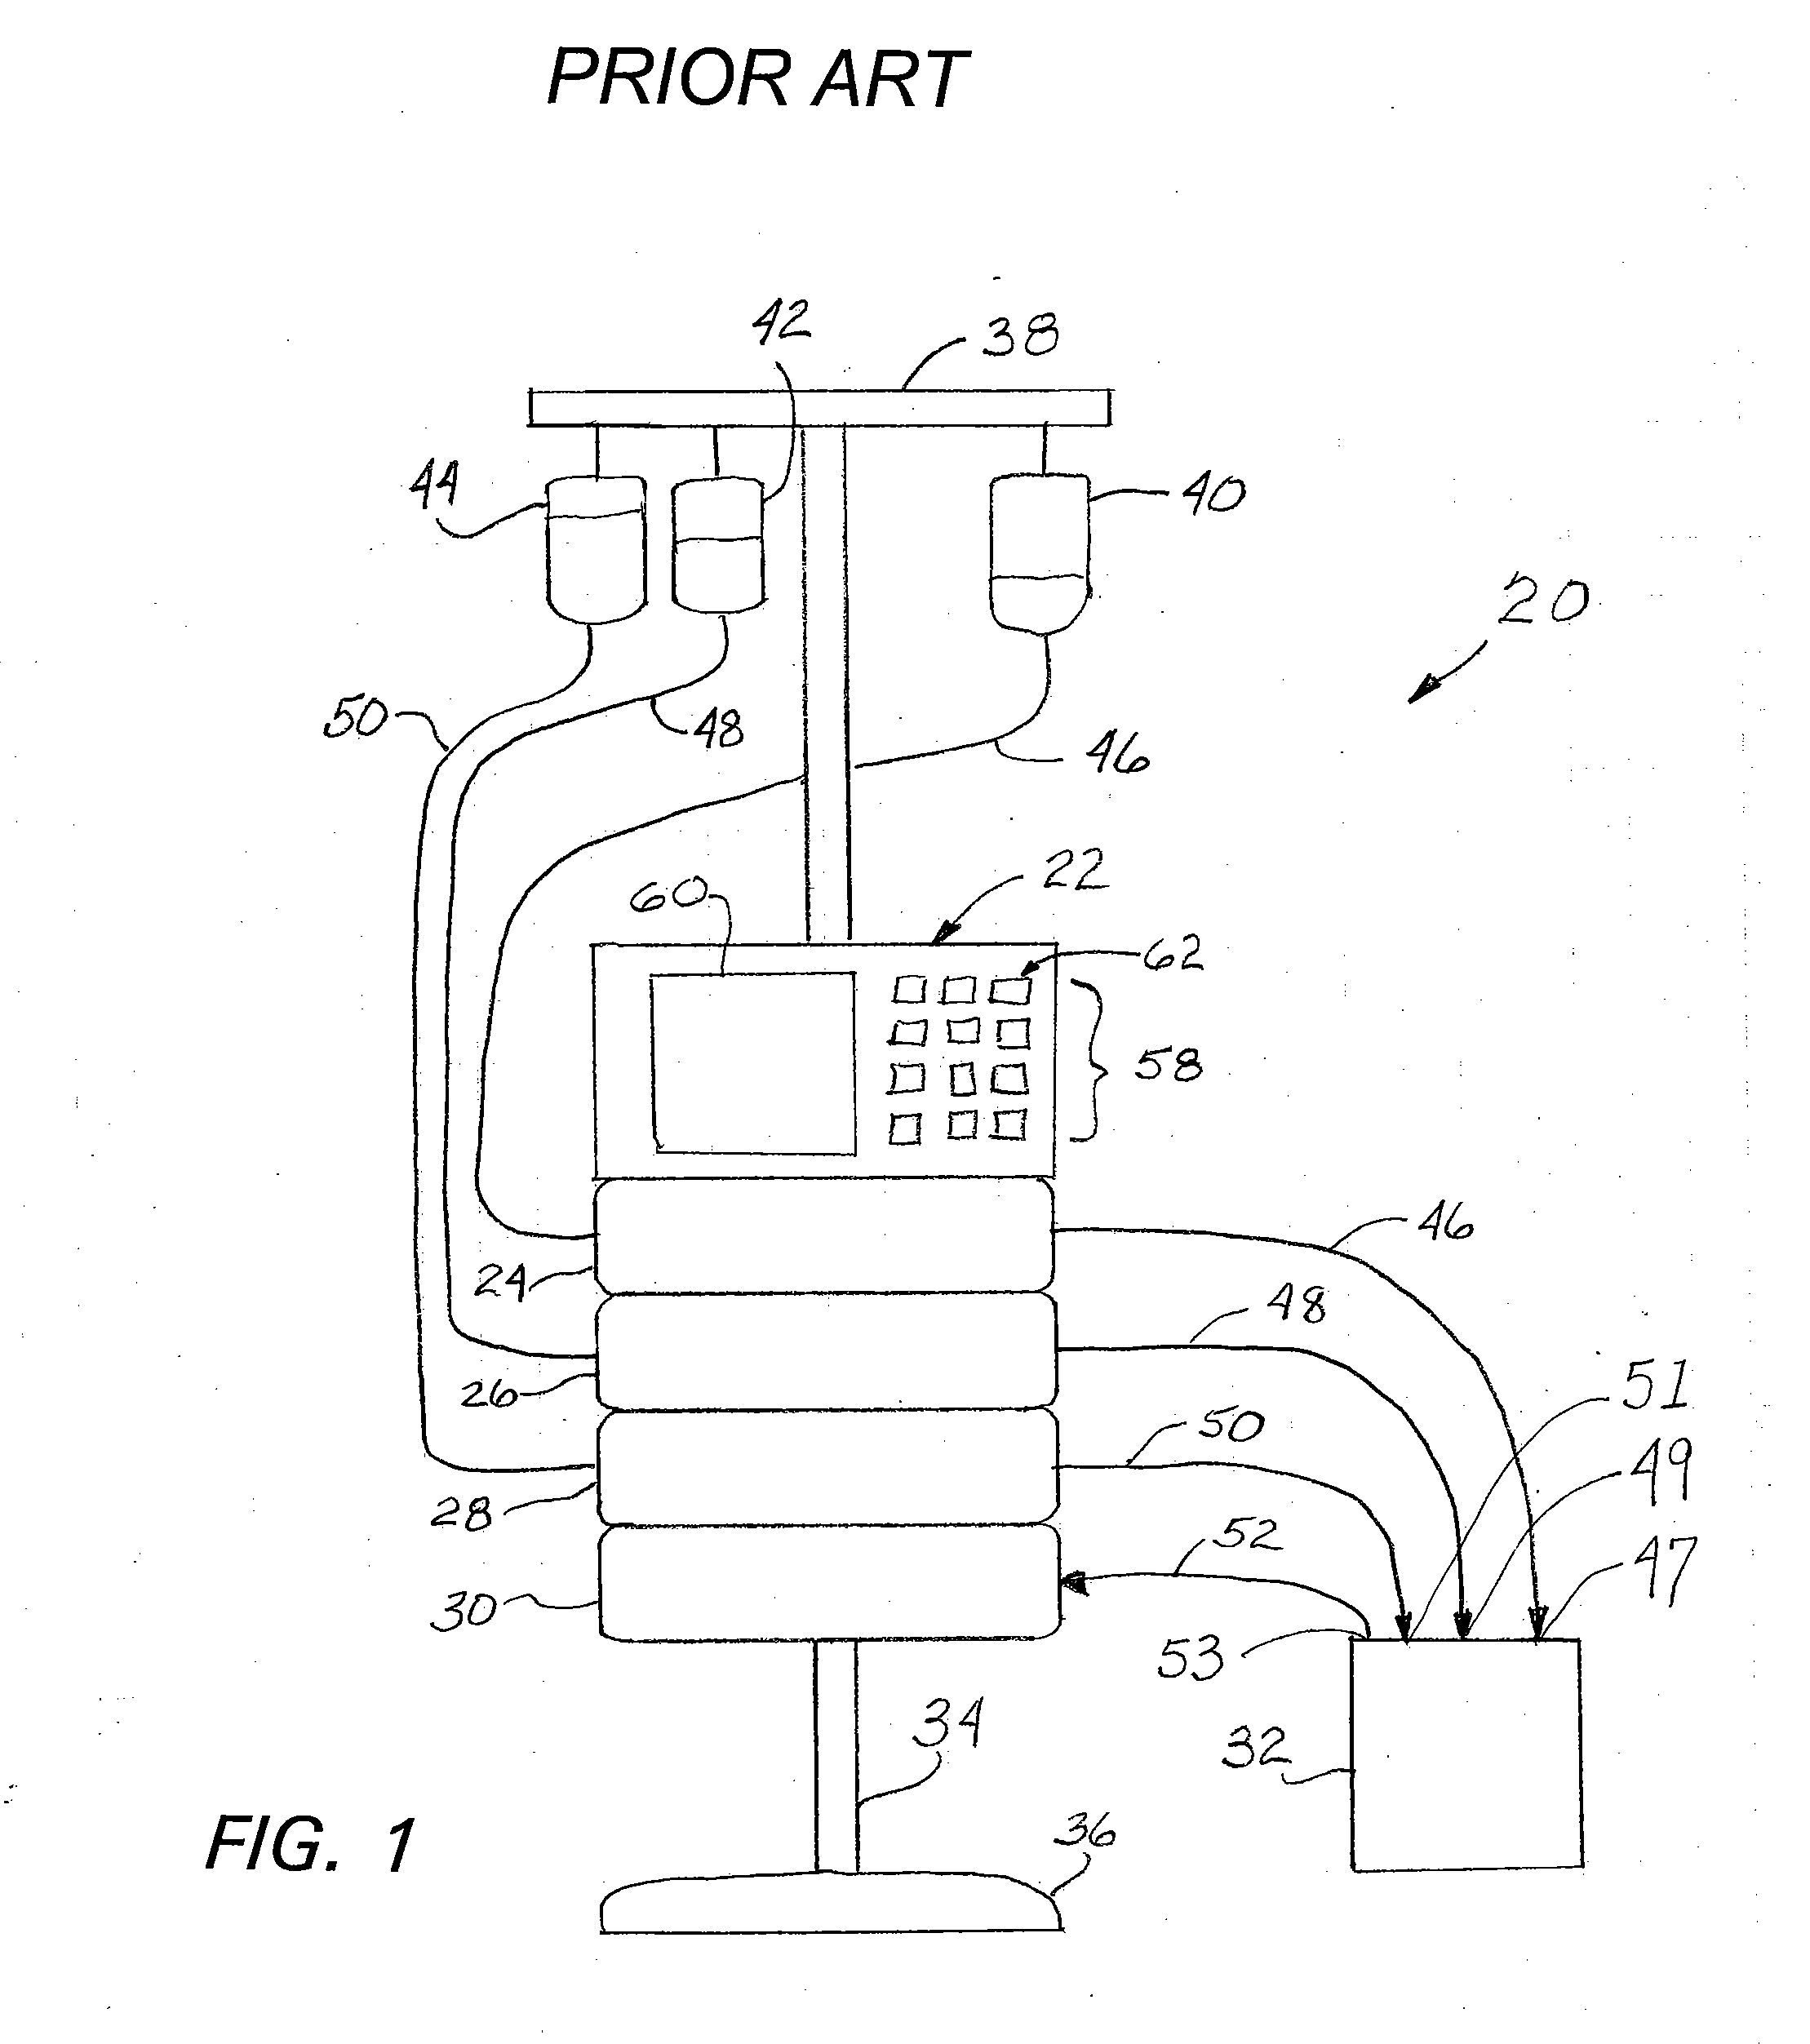 Distributed medication delivery system and method having autonomous delivery devices